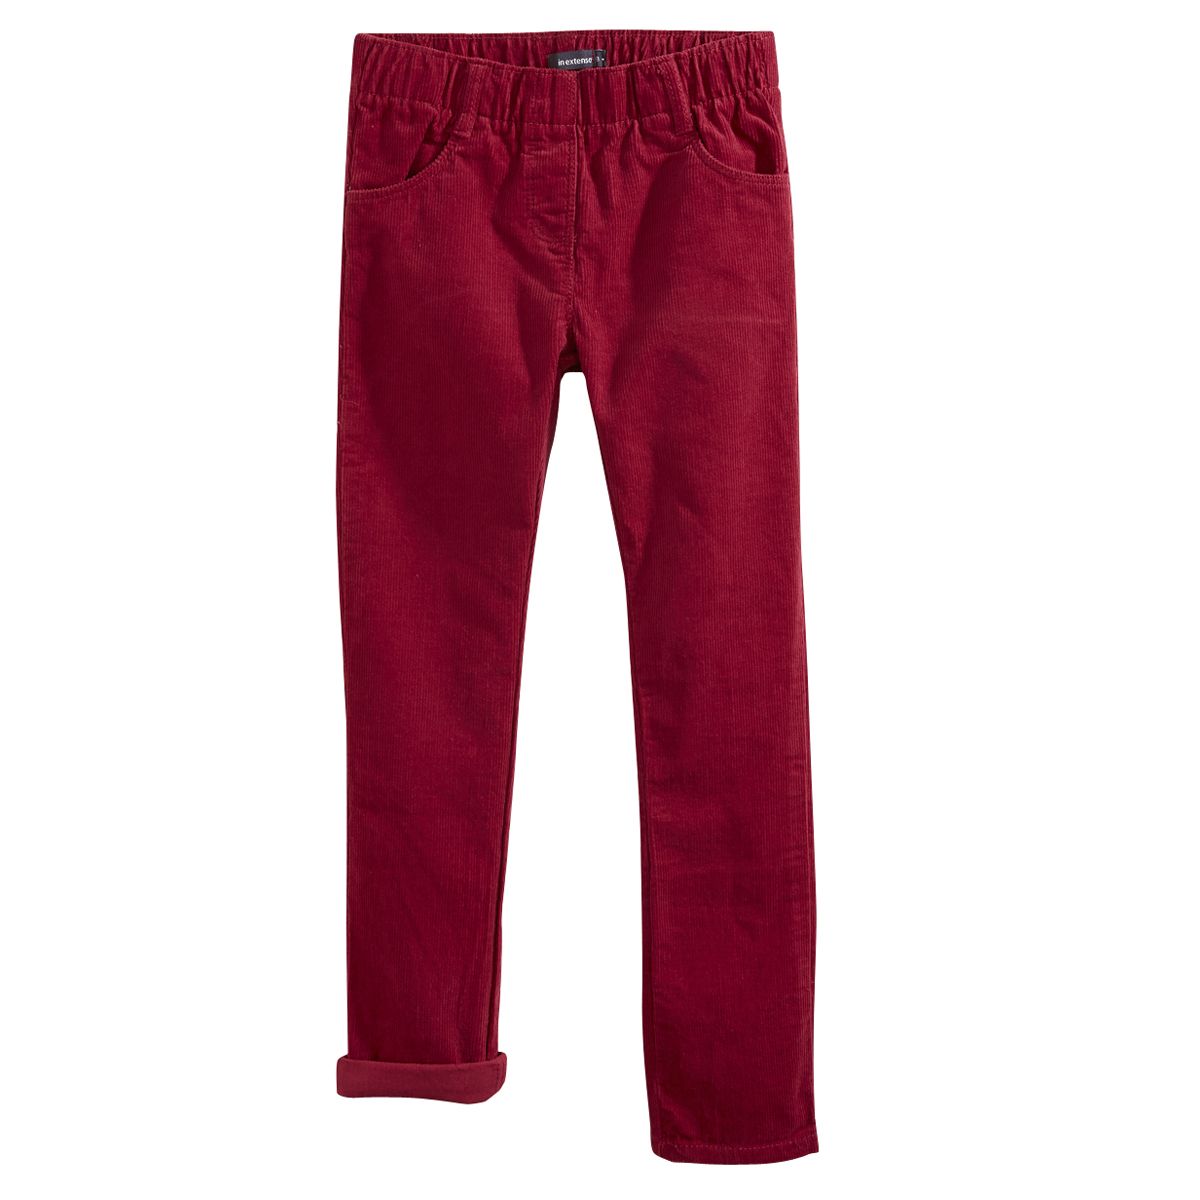 Pantalon rose d' In extension taille 46/48 - In Extenso - Auchan